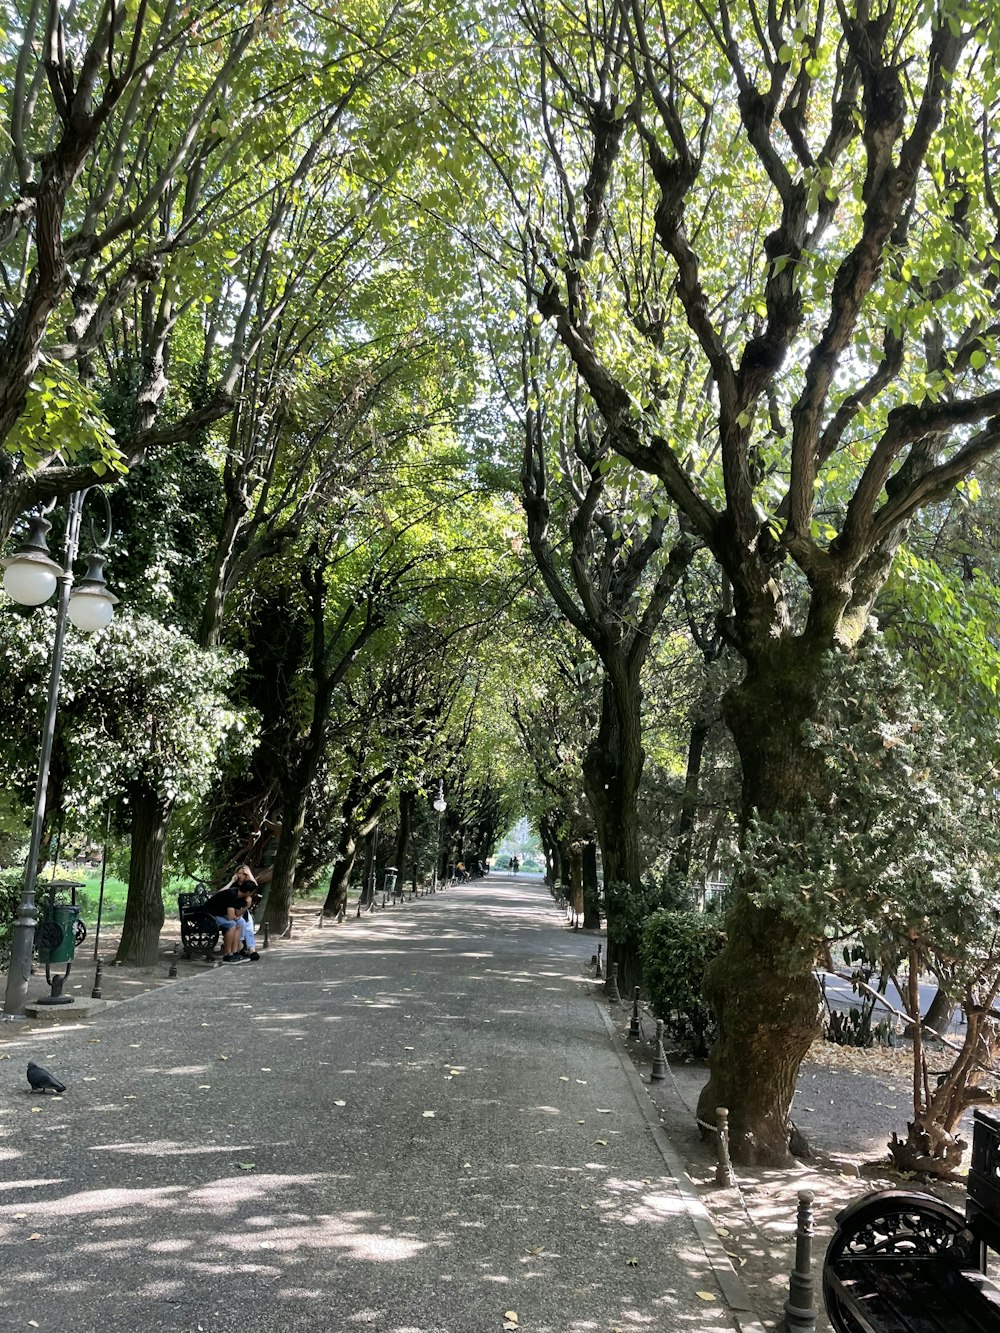 a street lined with trees and benches next to a park